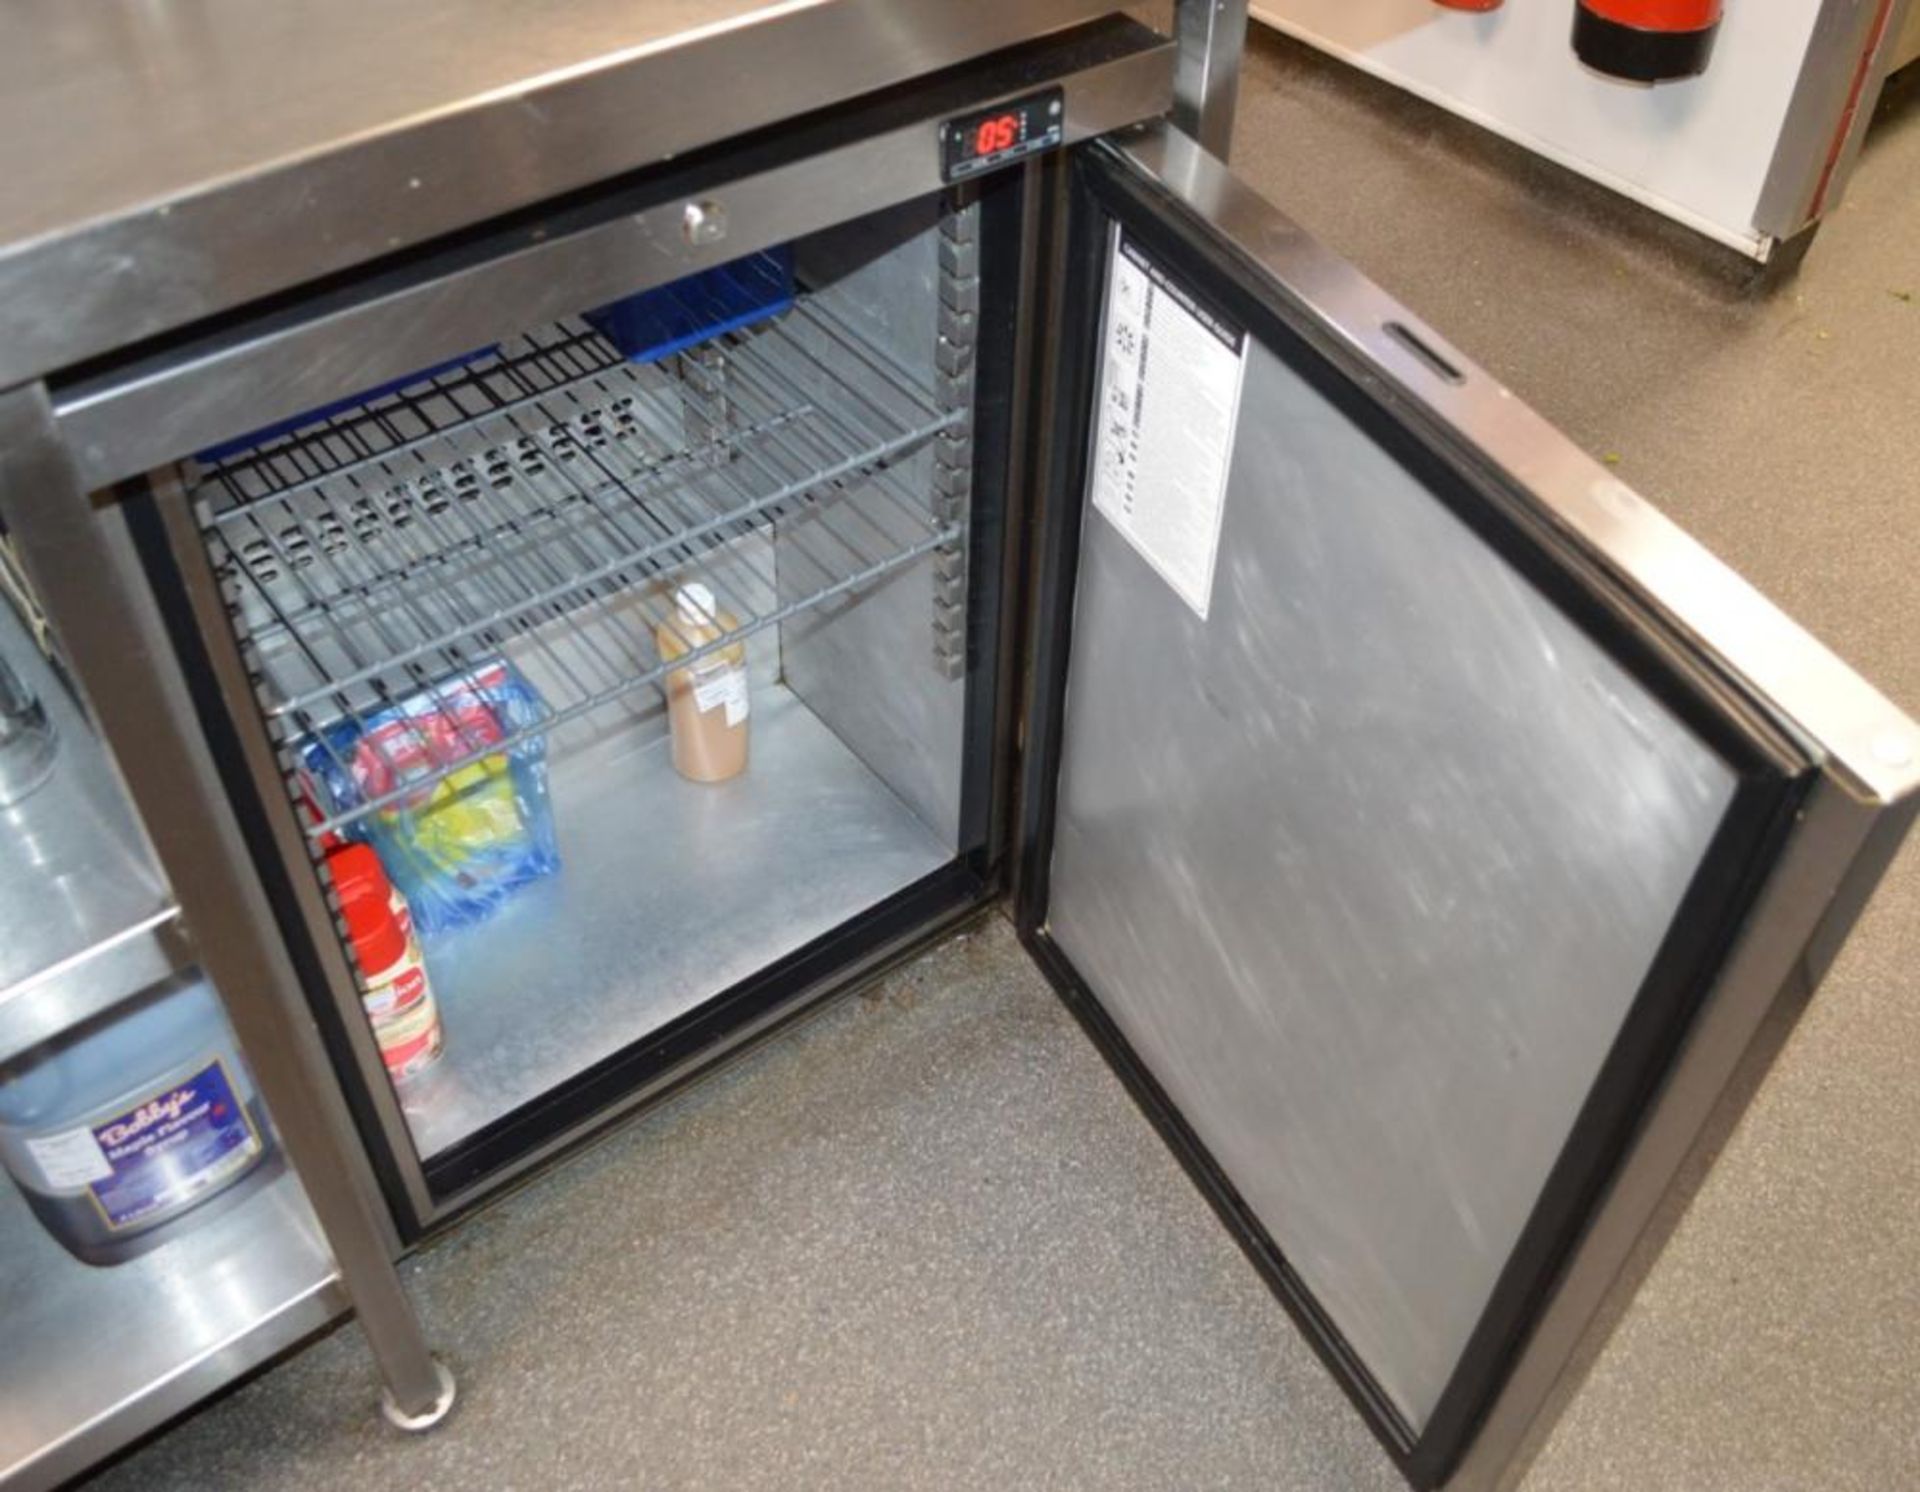 1 x Foster Undercounter Single Door Refrigerator With Stainless Steel Finish - Model HR150-A - H80 x - Image 2 of 3